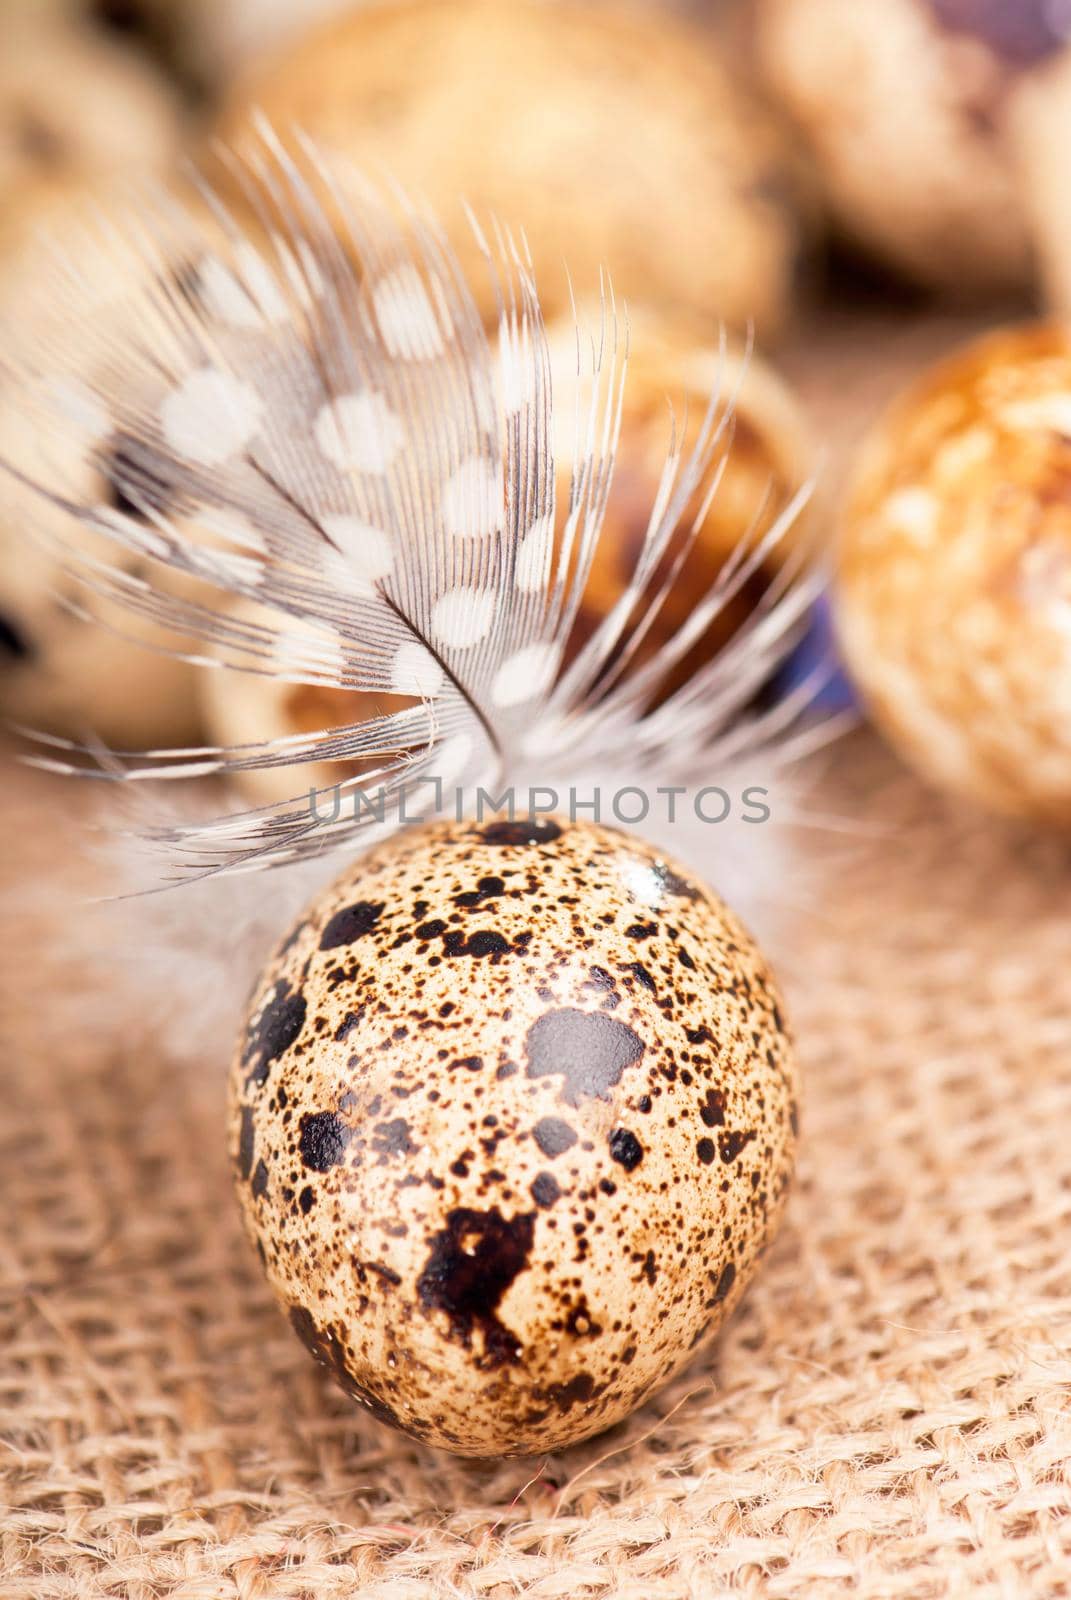 Quail eggs in a jug a feather on a canvas by aprilphoto